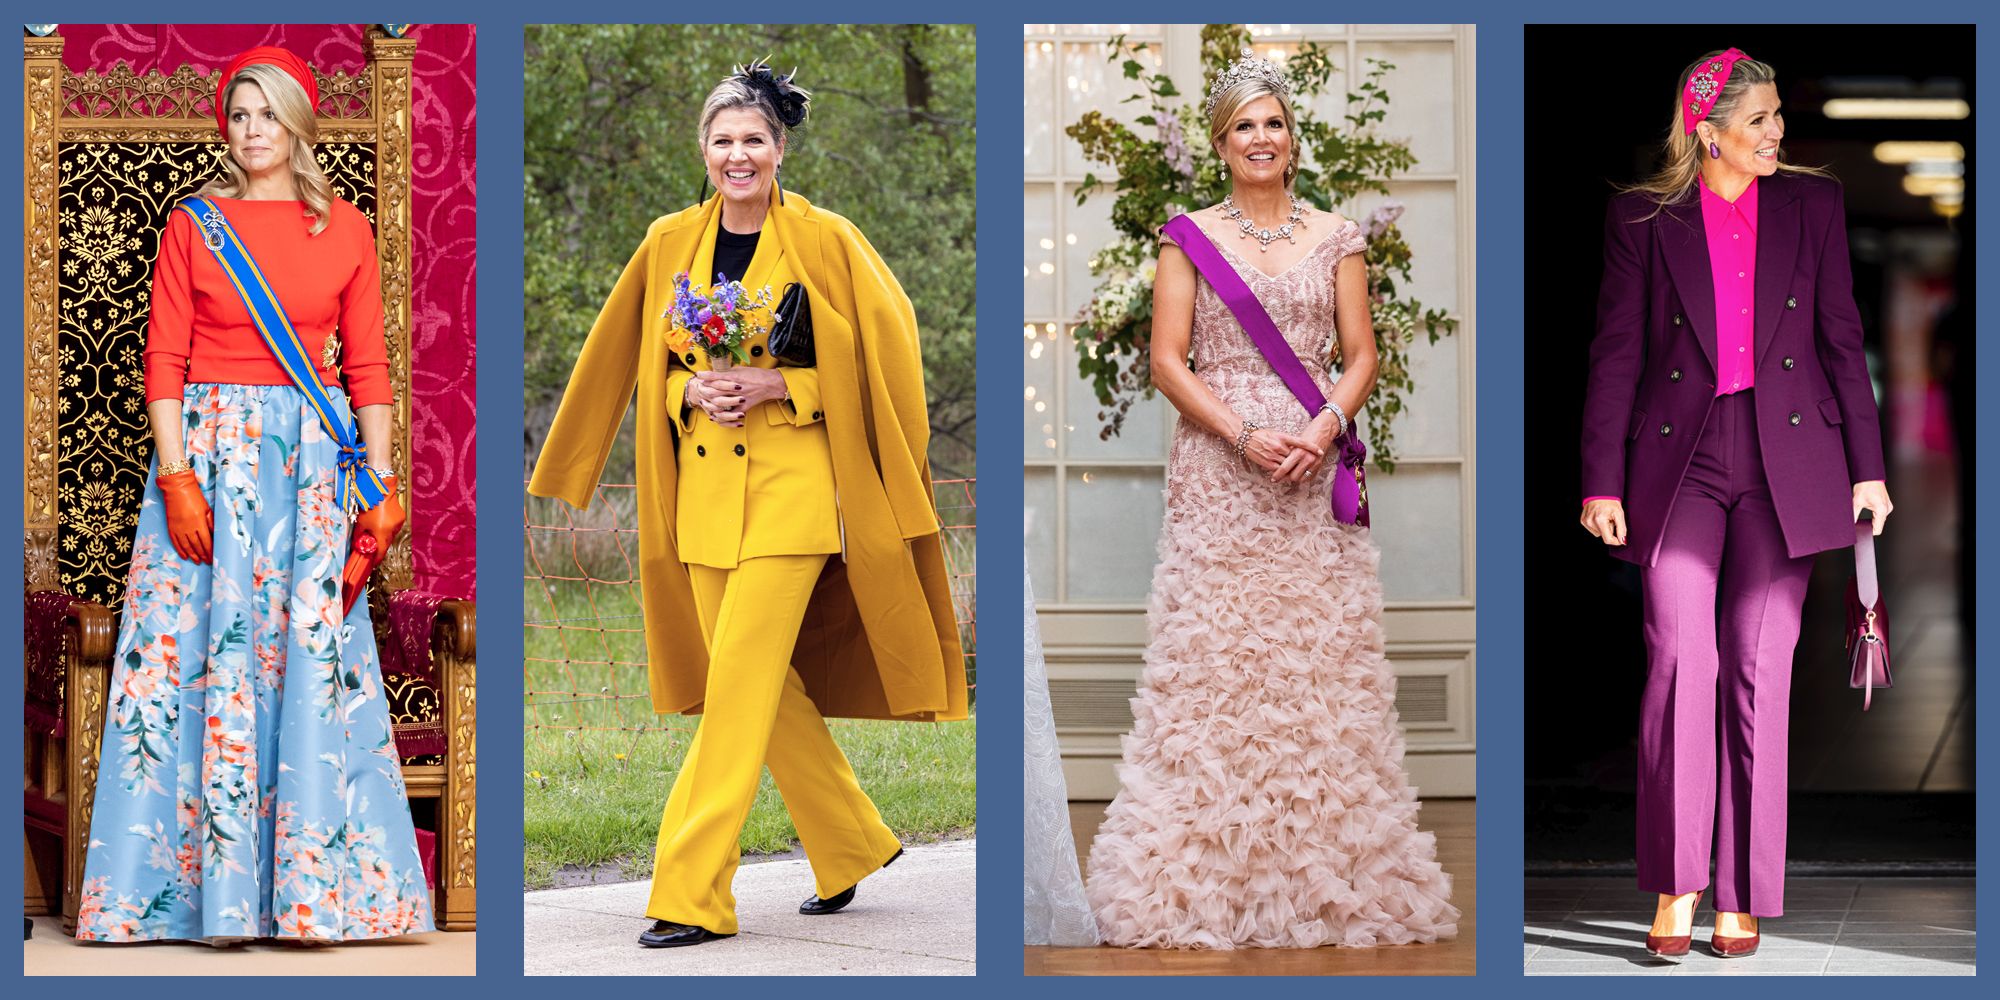 <p>Being a royal comes with a certain amount of attention, so it's hardly surprising that the queens and princesses of the world put in the effort when it comes to their wardrobes. While the <a href="https://www.townandcountrymag.com/style/fashion-trends/news/g1633/kate-middleton-fashion/">British royal family gets a lot of attention</a>, they're far from the only <a href="https://www.townandcountrymag.com/society/tradition/g44628445/queen-jetsun-pema-fashion-style-photos/">regal style icons out there</a>. In fact, Queen Maxima of the Netherlands has been making standout fashion statements for years with her eye for tailoring and her affinity for anything-but-shy pops of color. Here, we take a look back at some of the queen's most dynamic looks.</p>